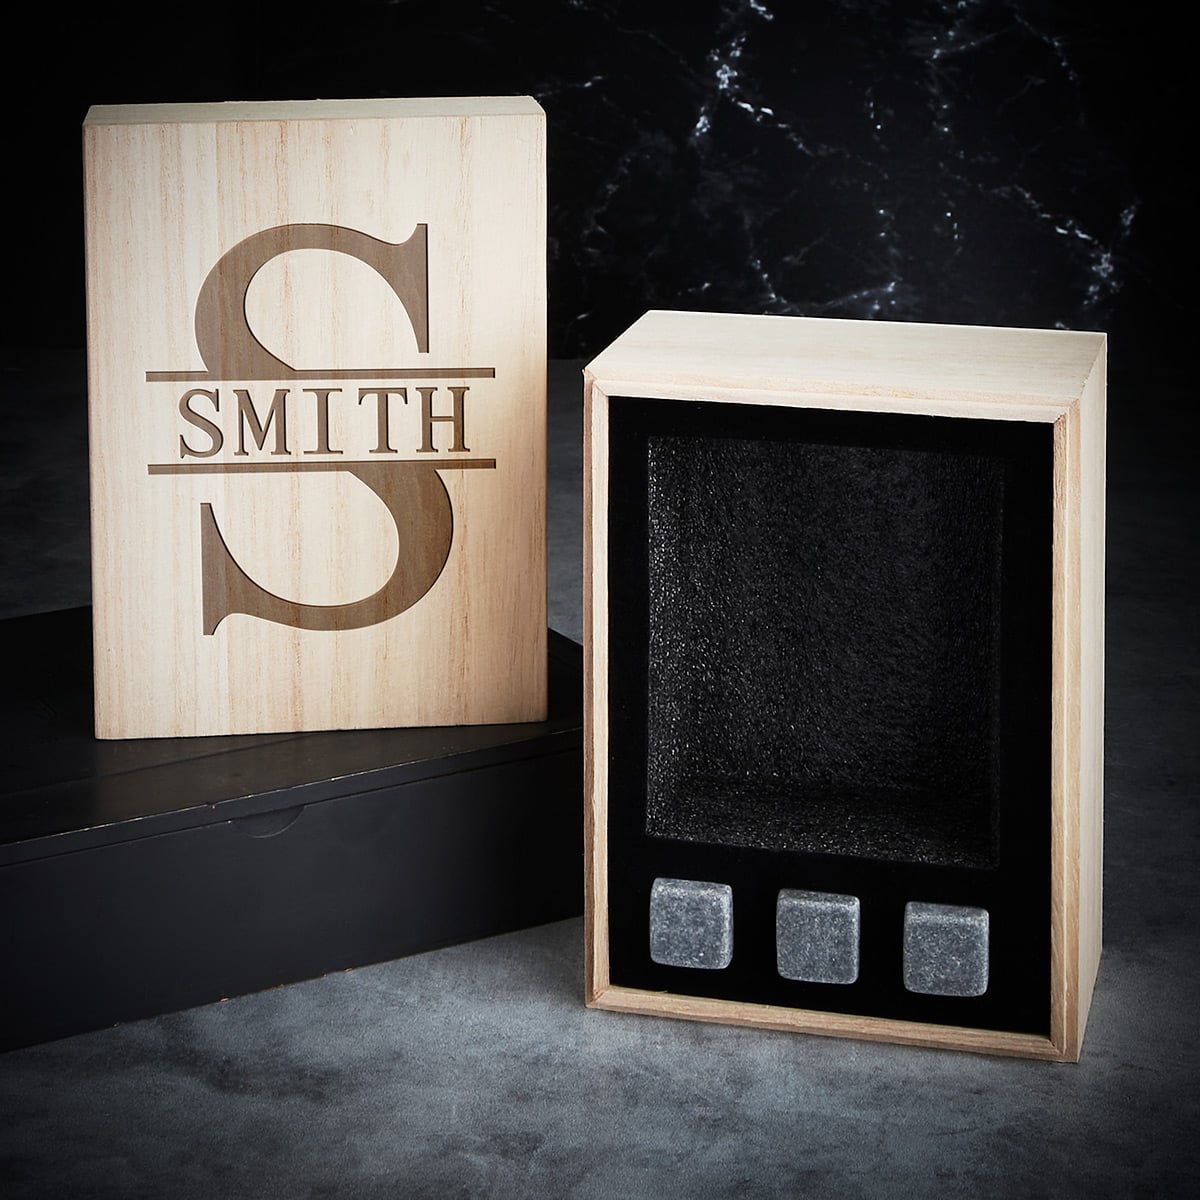 Mens Gift Set with Custom Whiskey Glass and Box